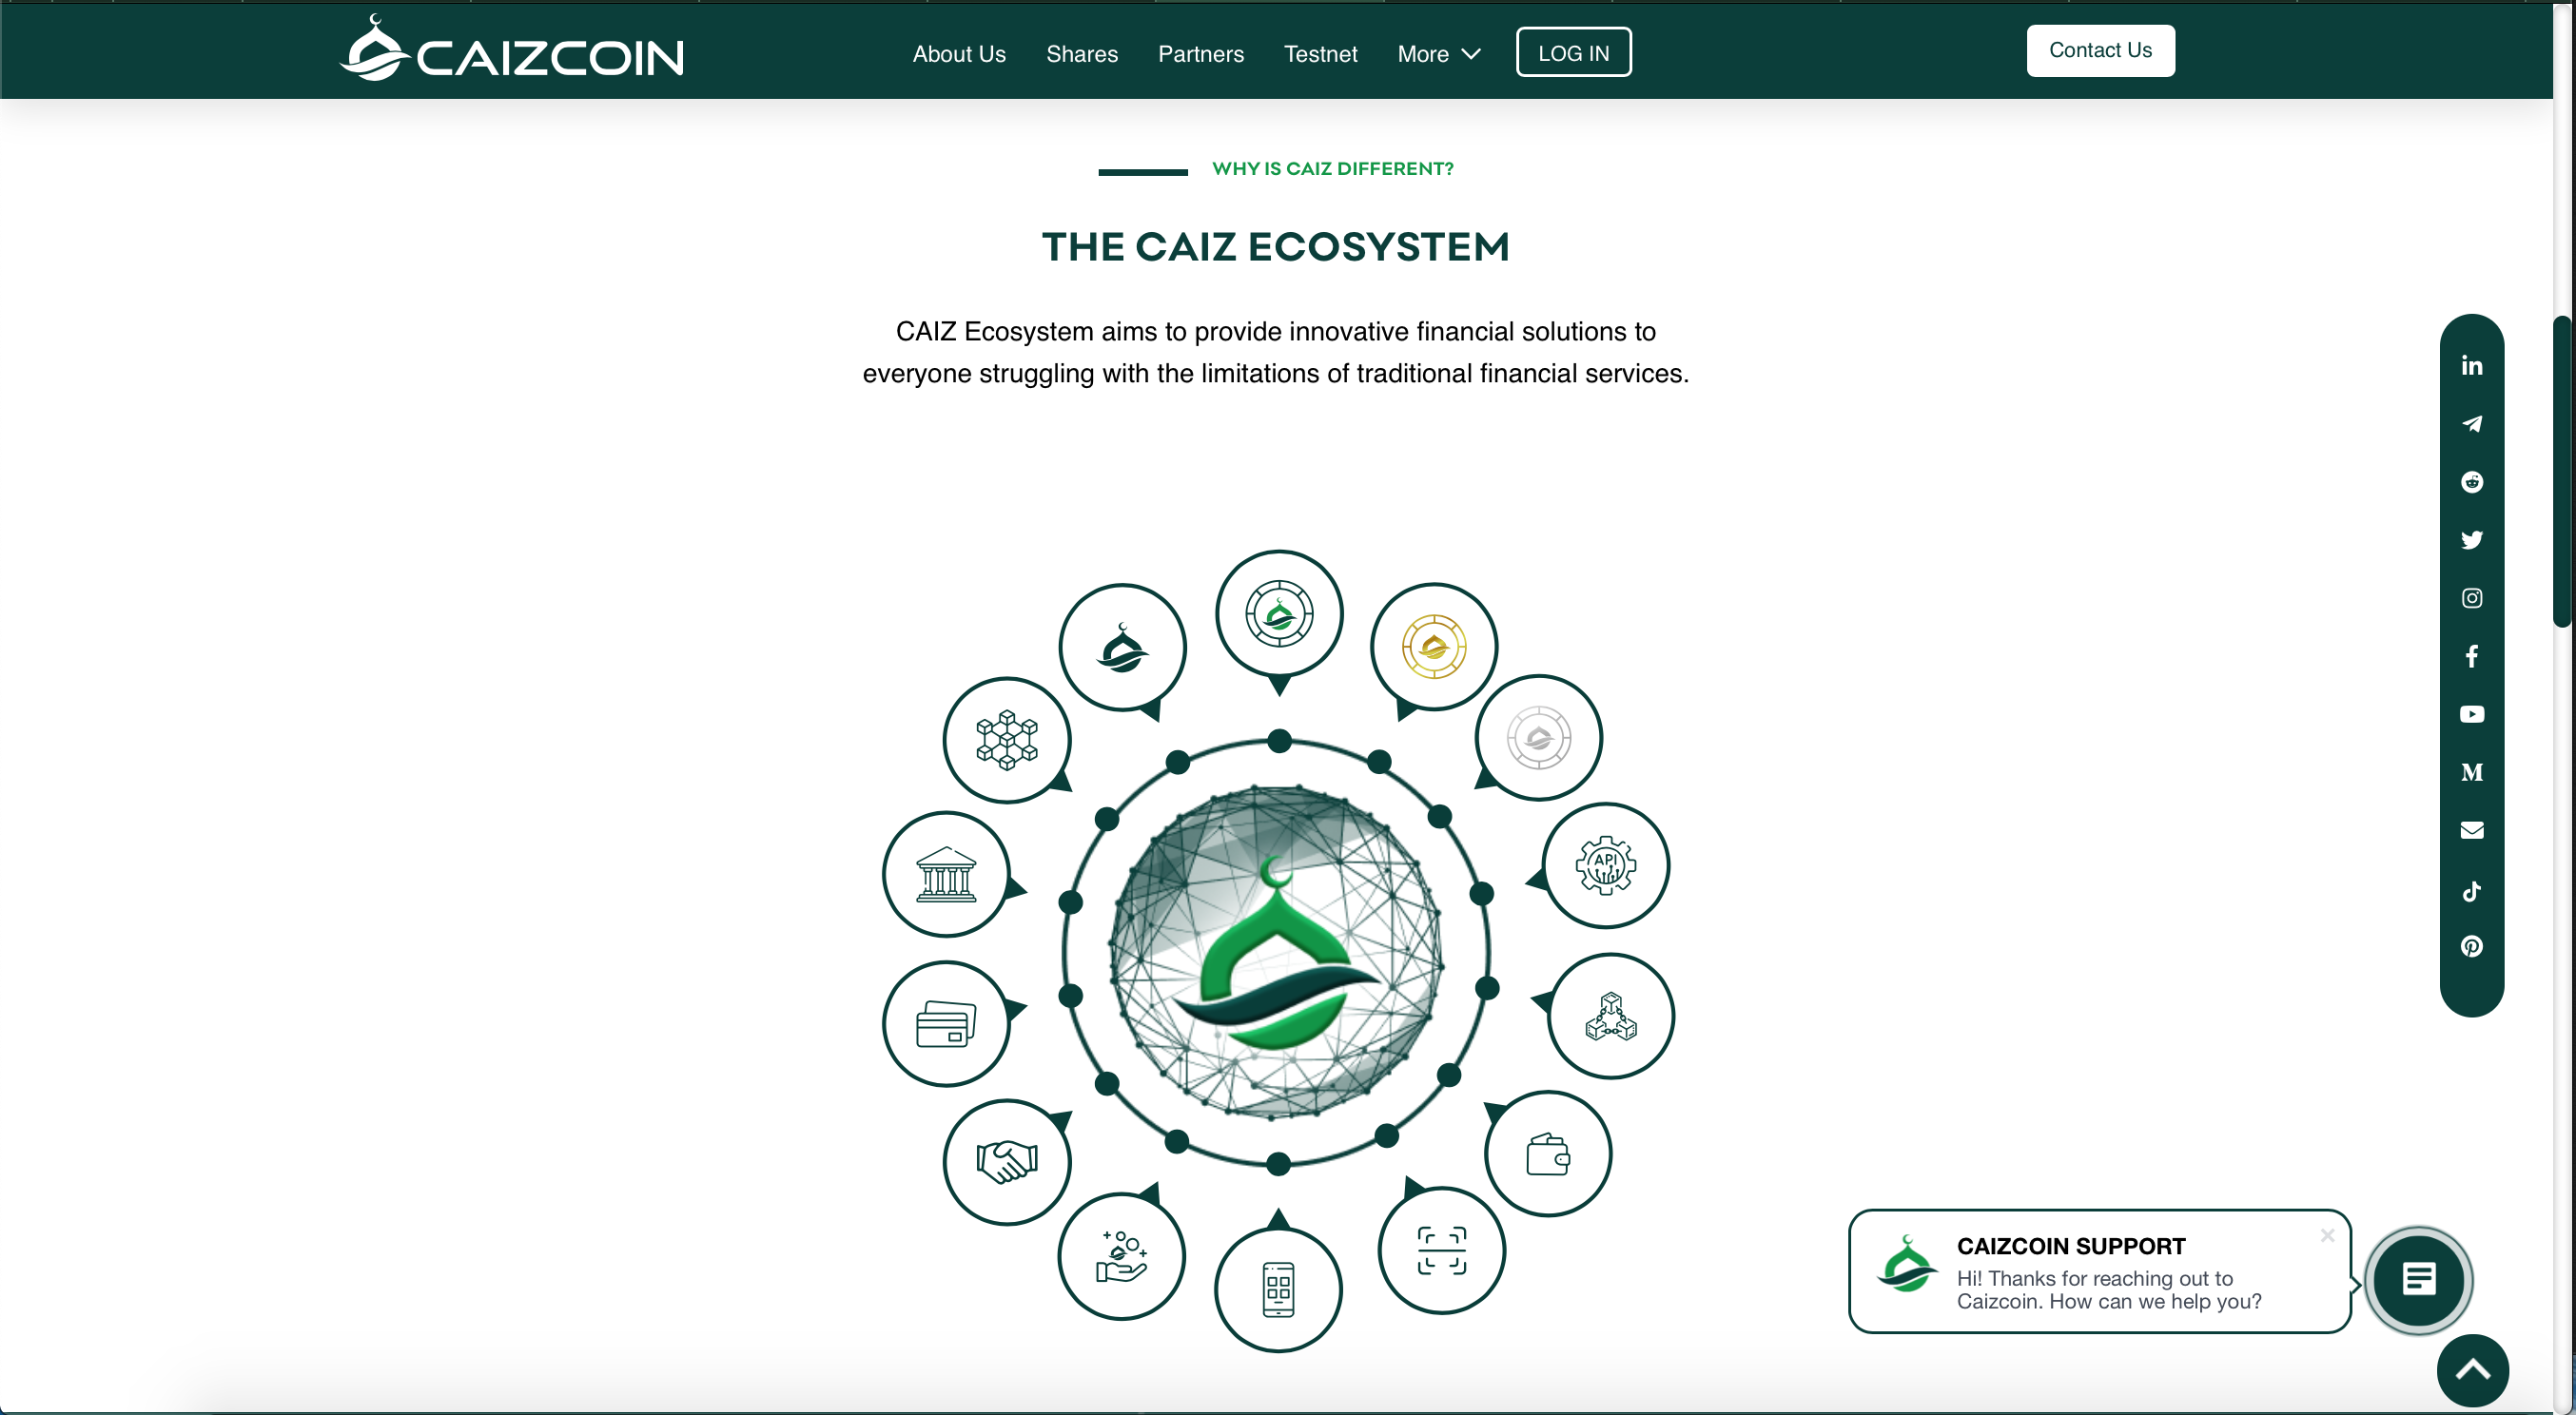 CAIZCOIN ecosystem as advertised on their website caizcoin.com. A screenshot by Vasily Sonkin